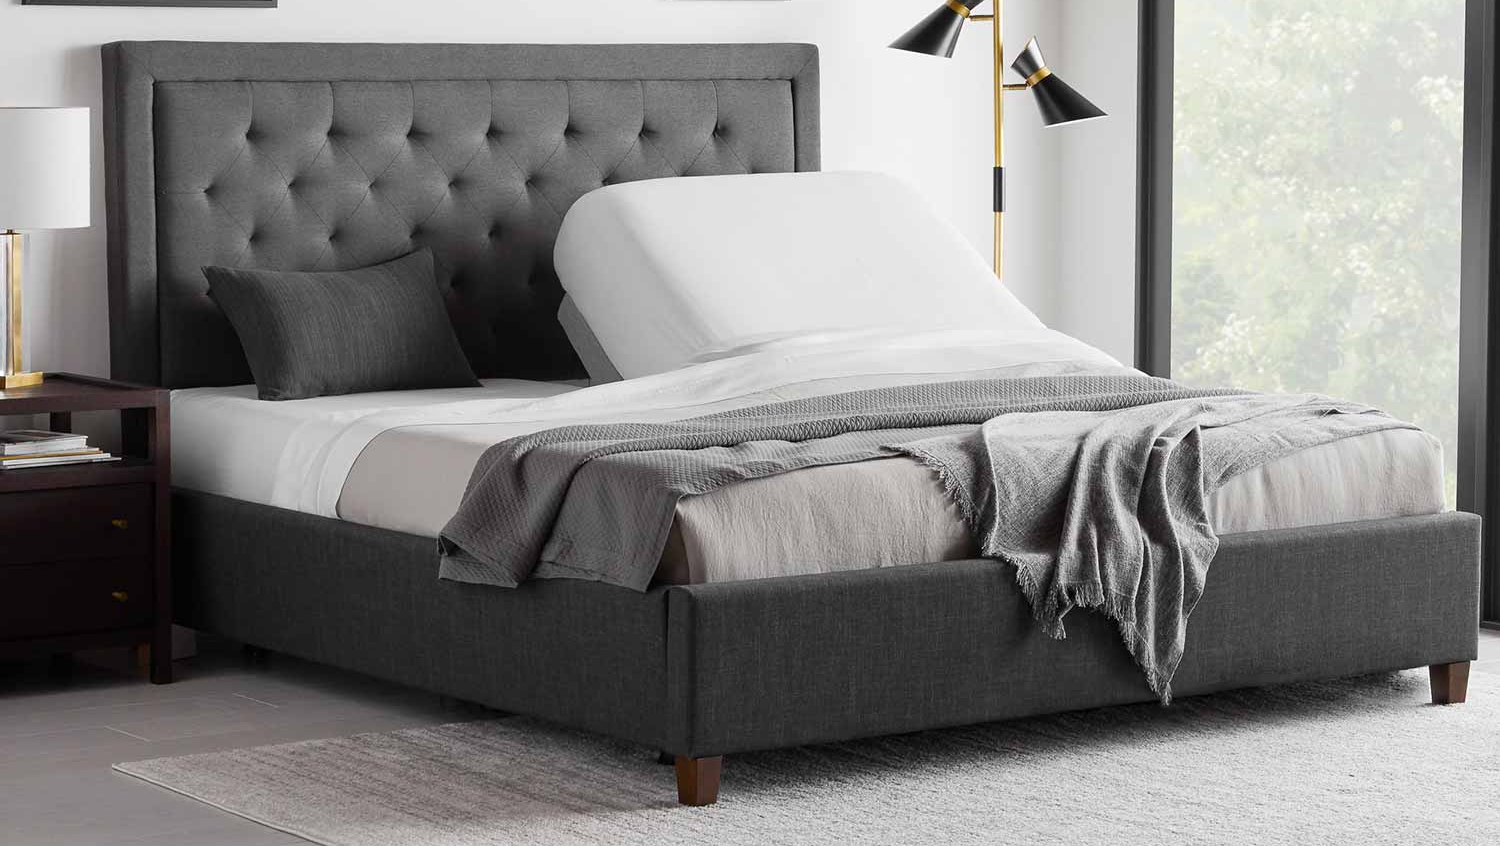 <hope mattress, malouf adjustable m555 bed base, split king, move head and feet independently>